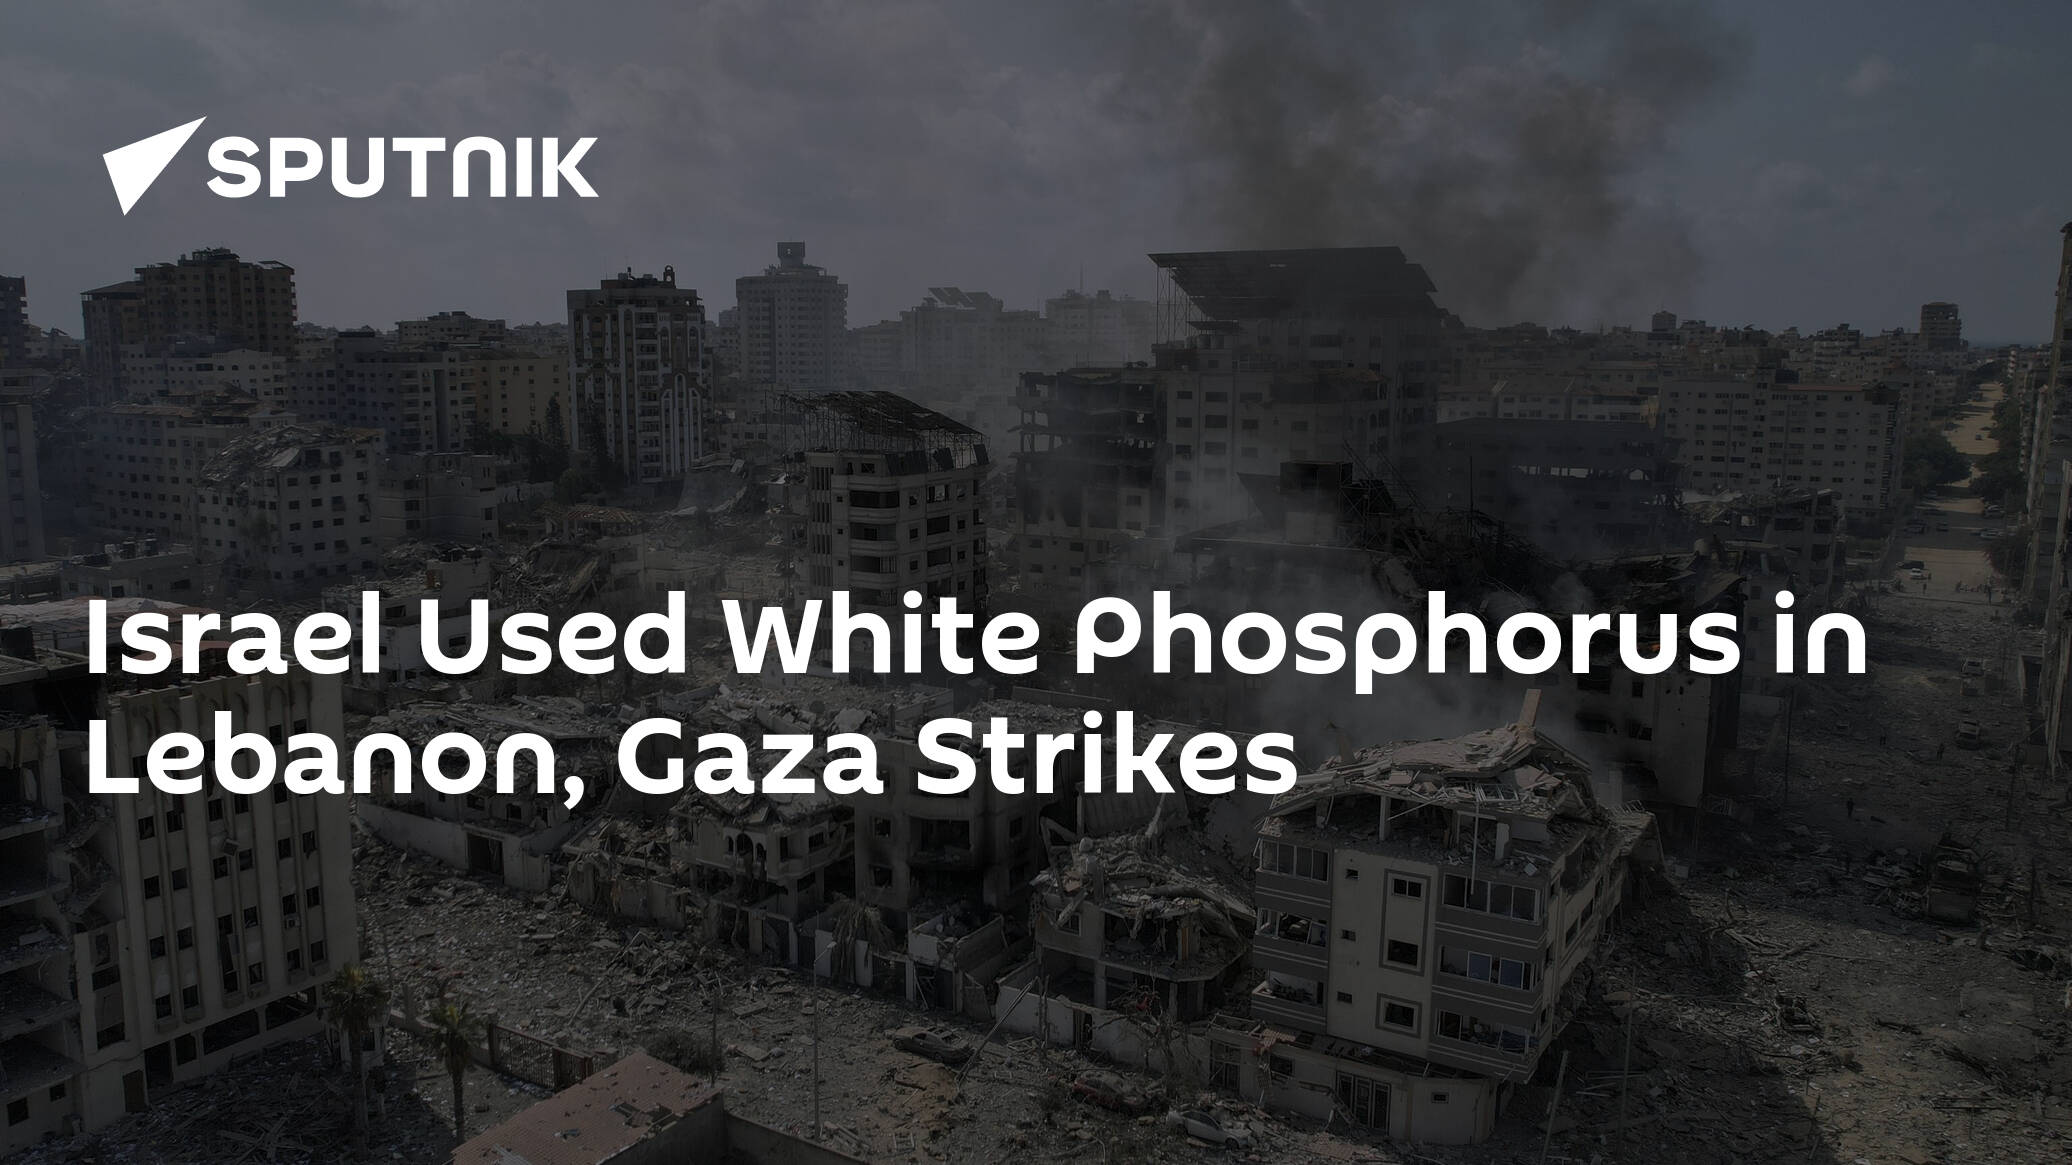 Israel Used White Phosphorus in Lebanon, Gaza Strikes, Human Rights Watch Finds